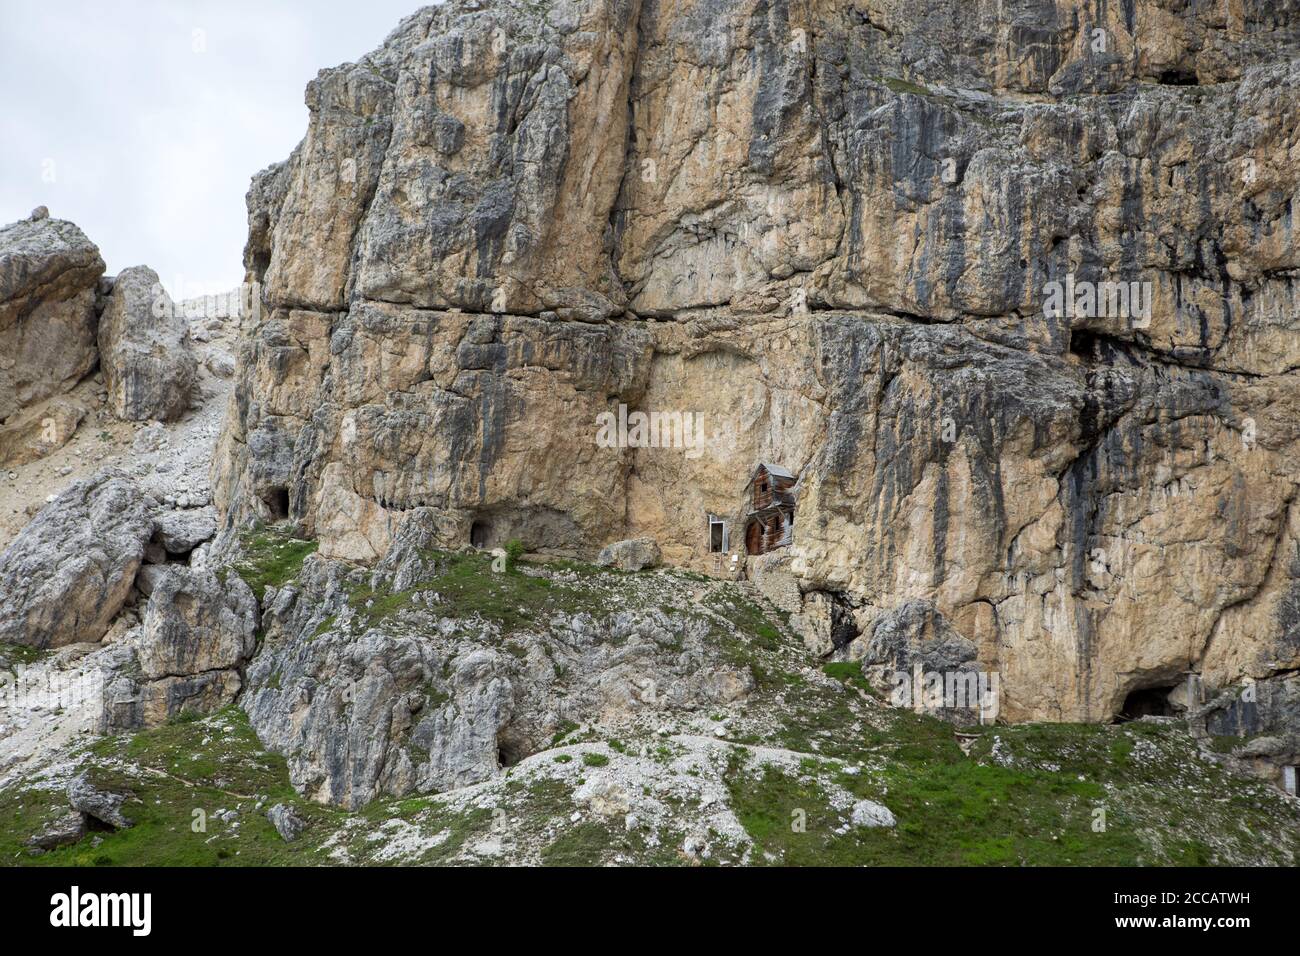 On 1915, an Alpini troop unit occupied the ledge halfway up the rock face of the Piccolo Lagazuoi, a wide rocky step which crosses the mountain Stock Photo